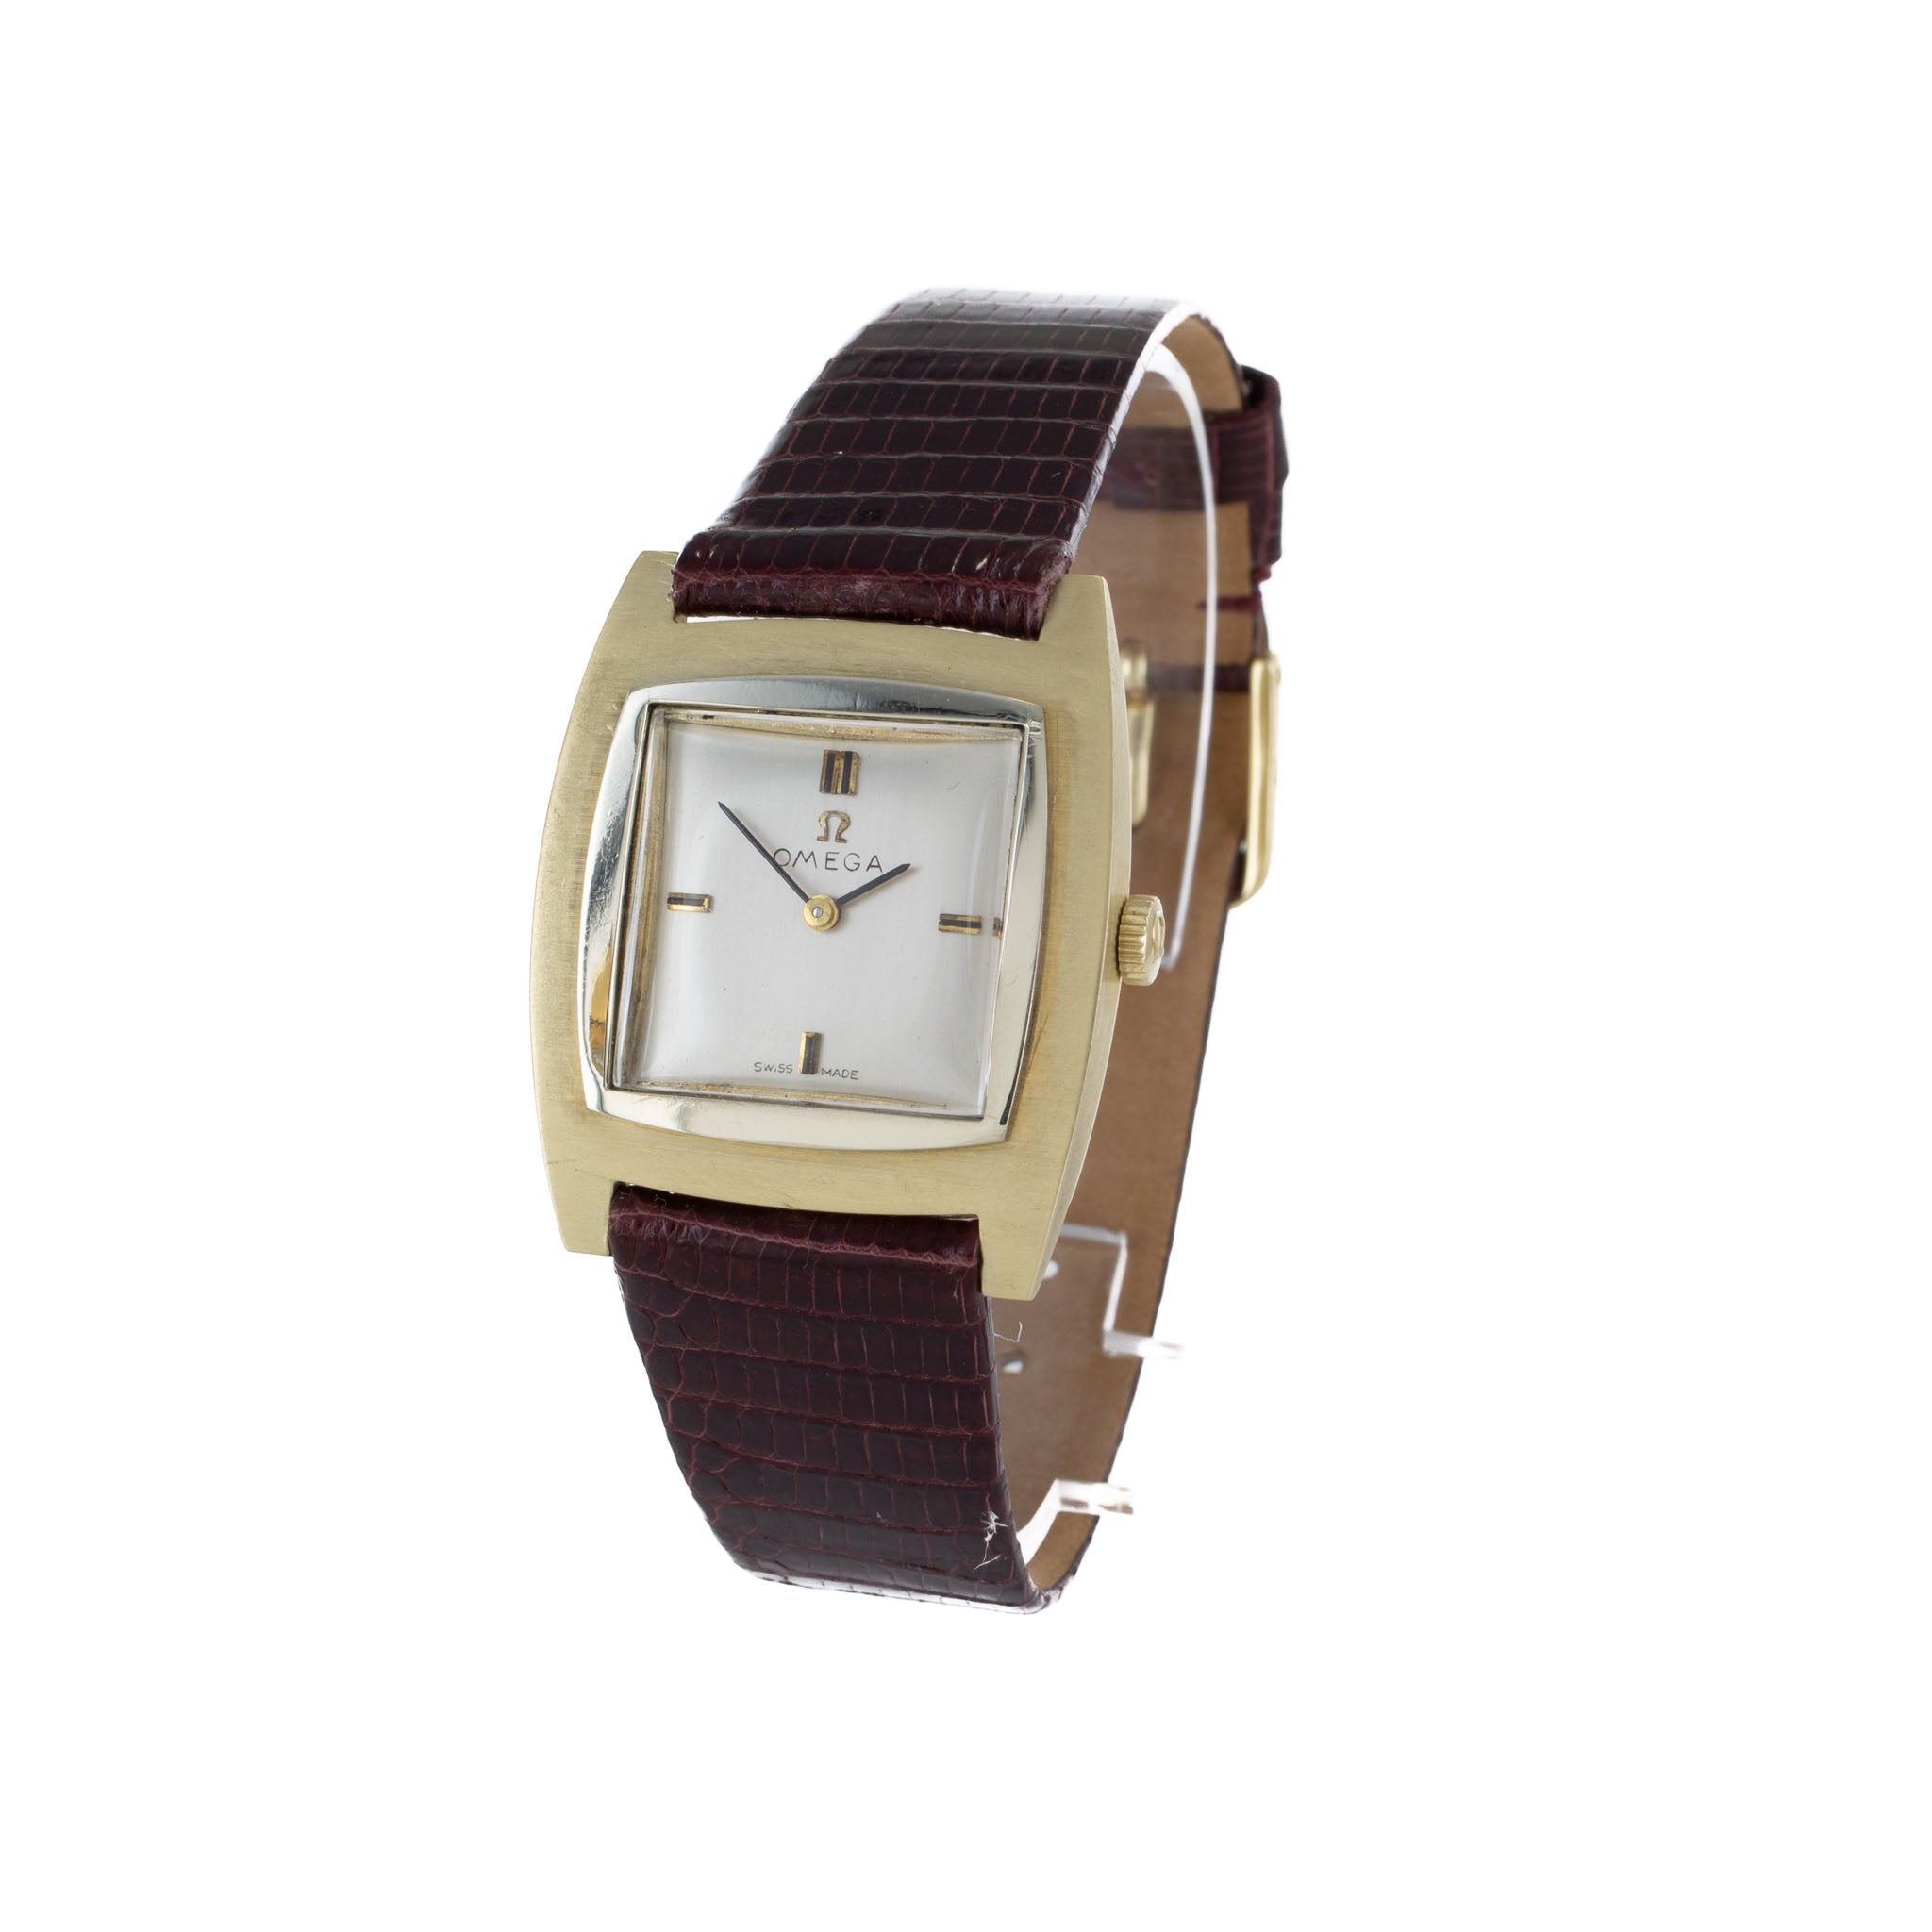 Omega 14k Gold & Leather Watch – Morningstar's Jewelers